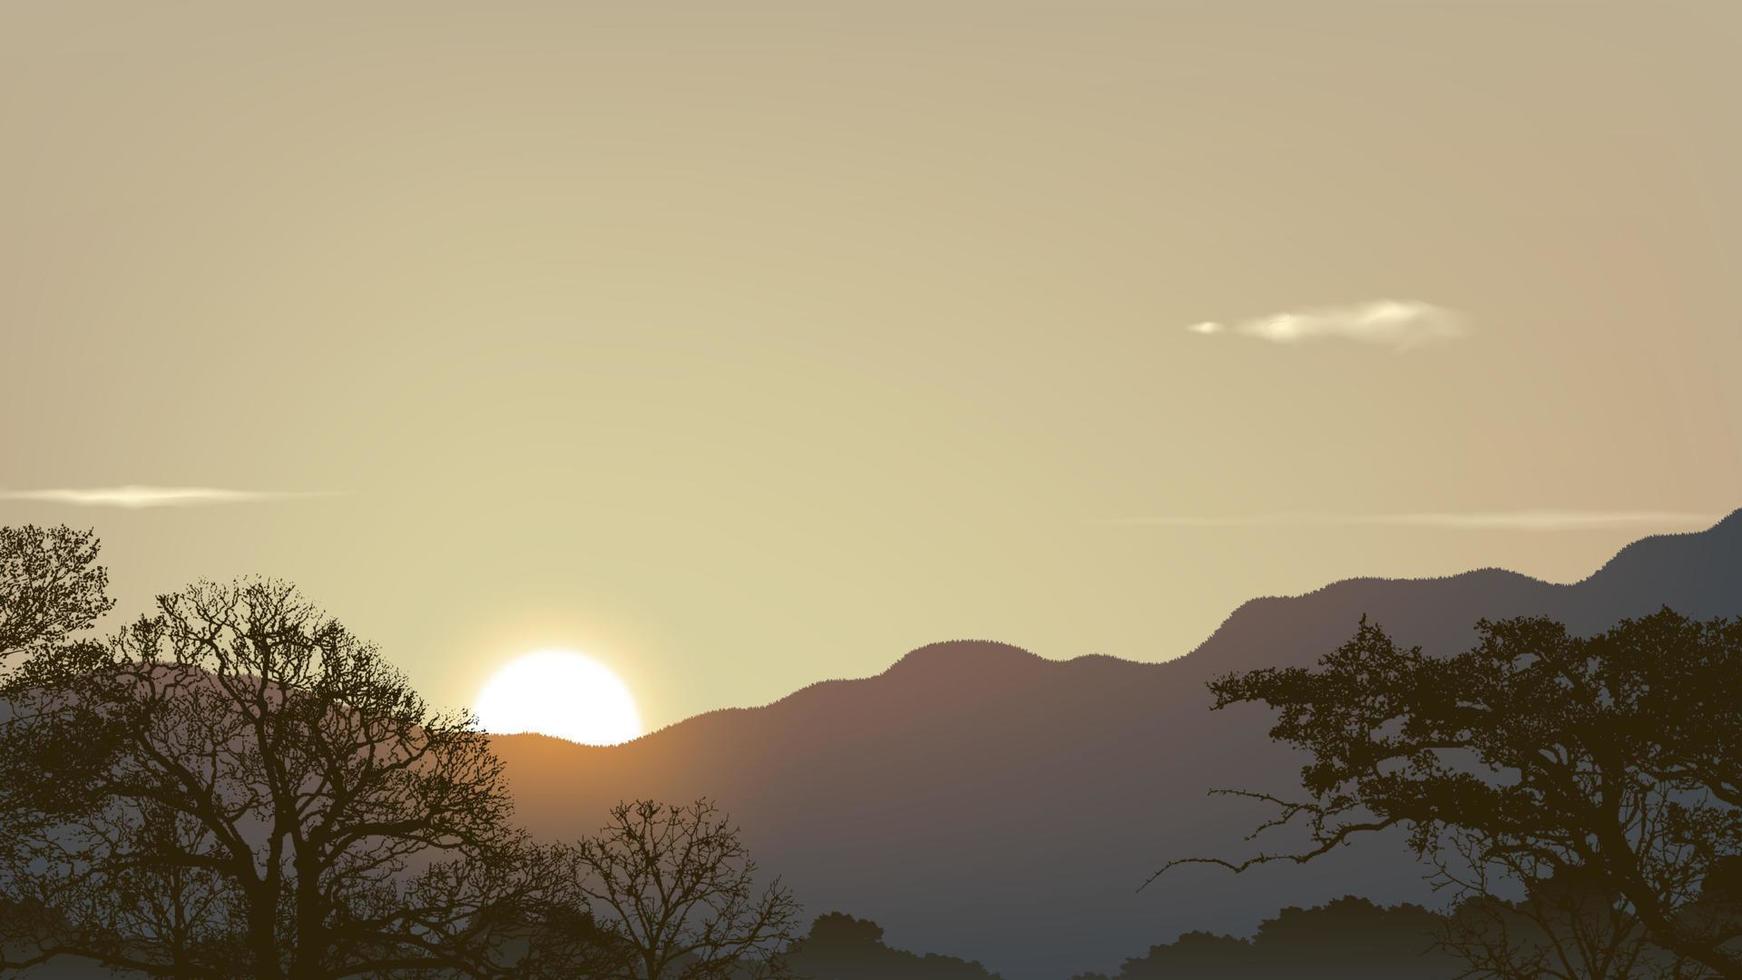 Scenery vector illustration of beautiful mountains and forest with a sunset in silhouette style